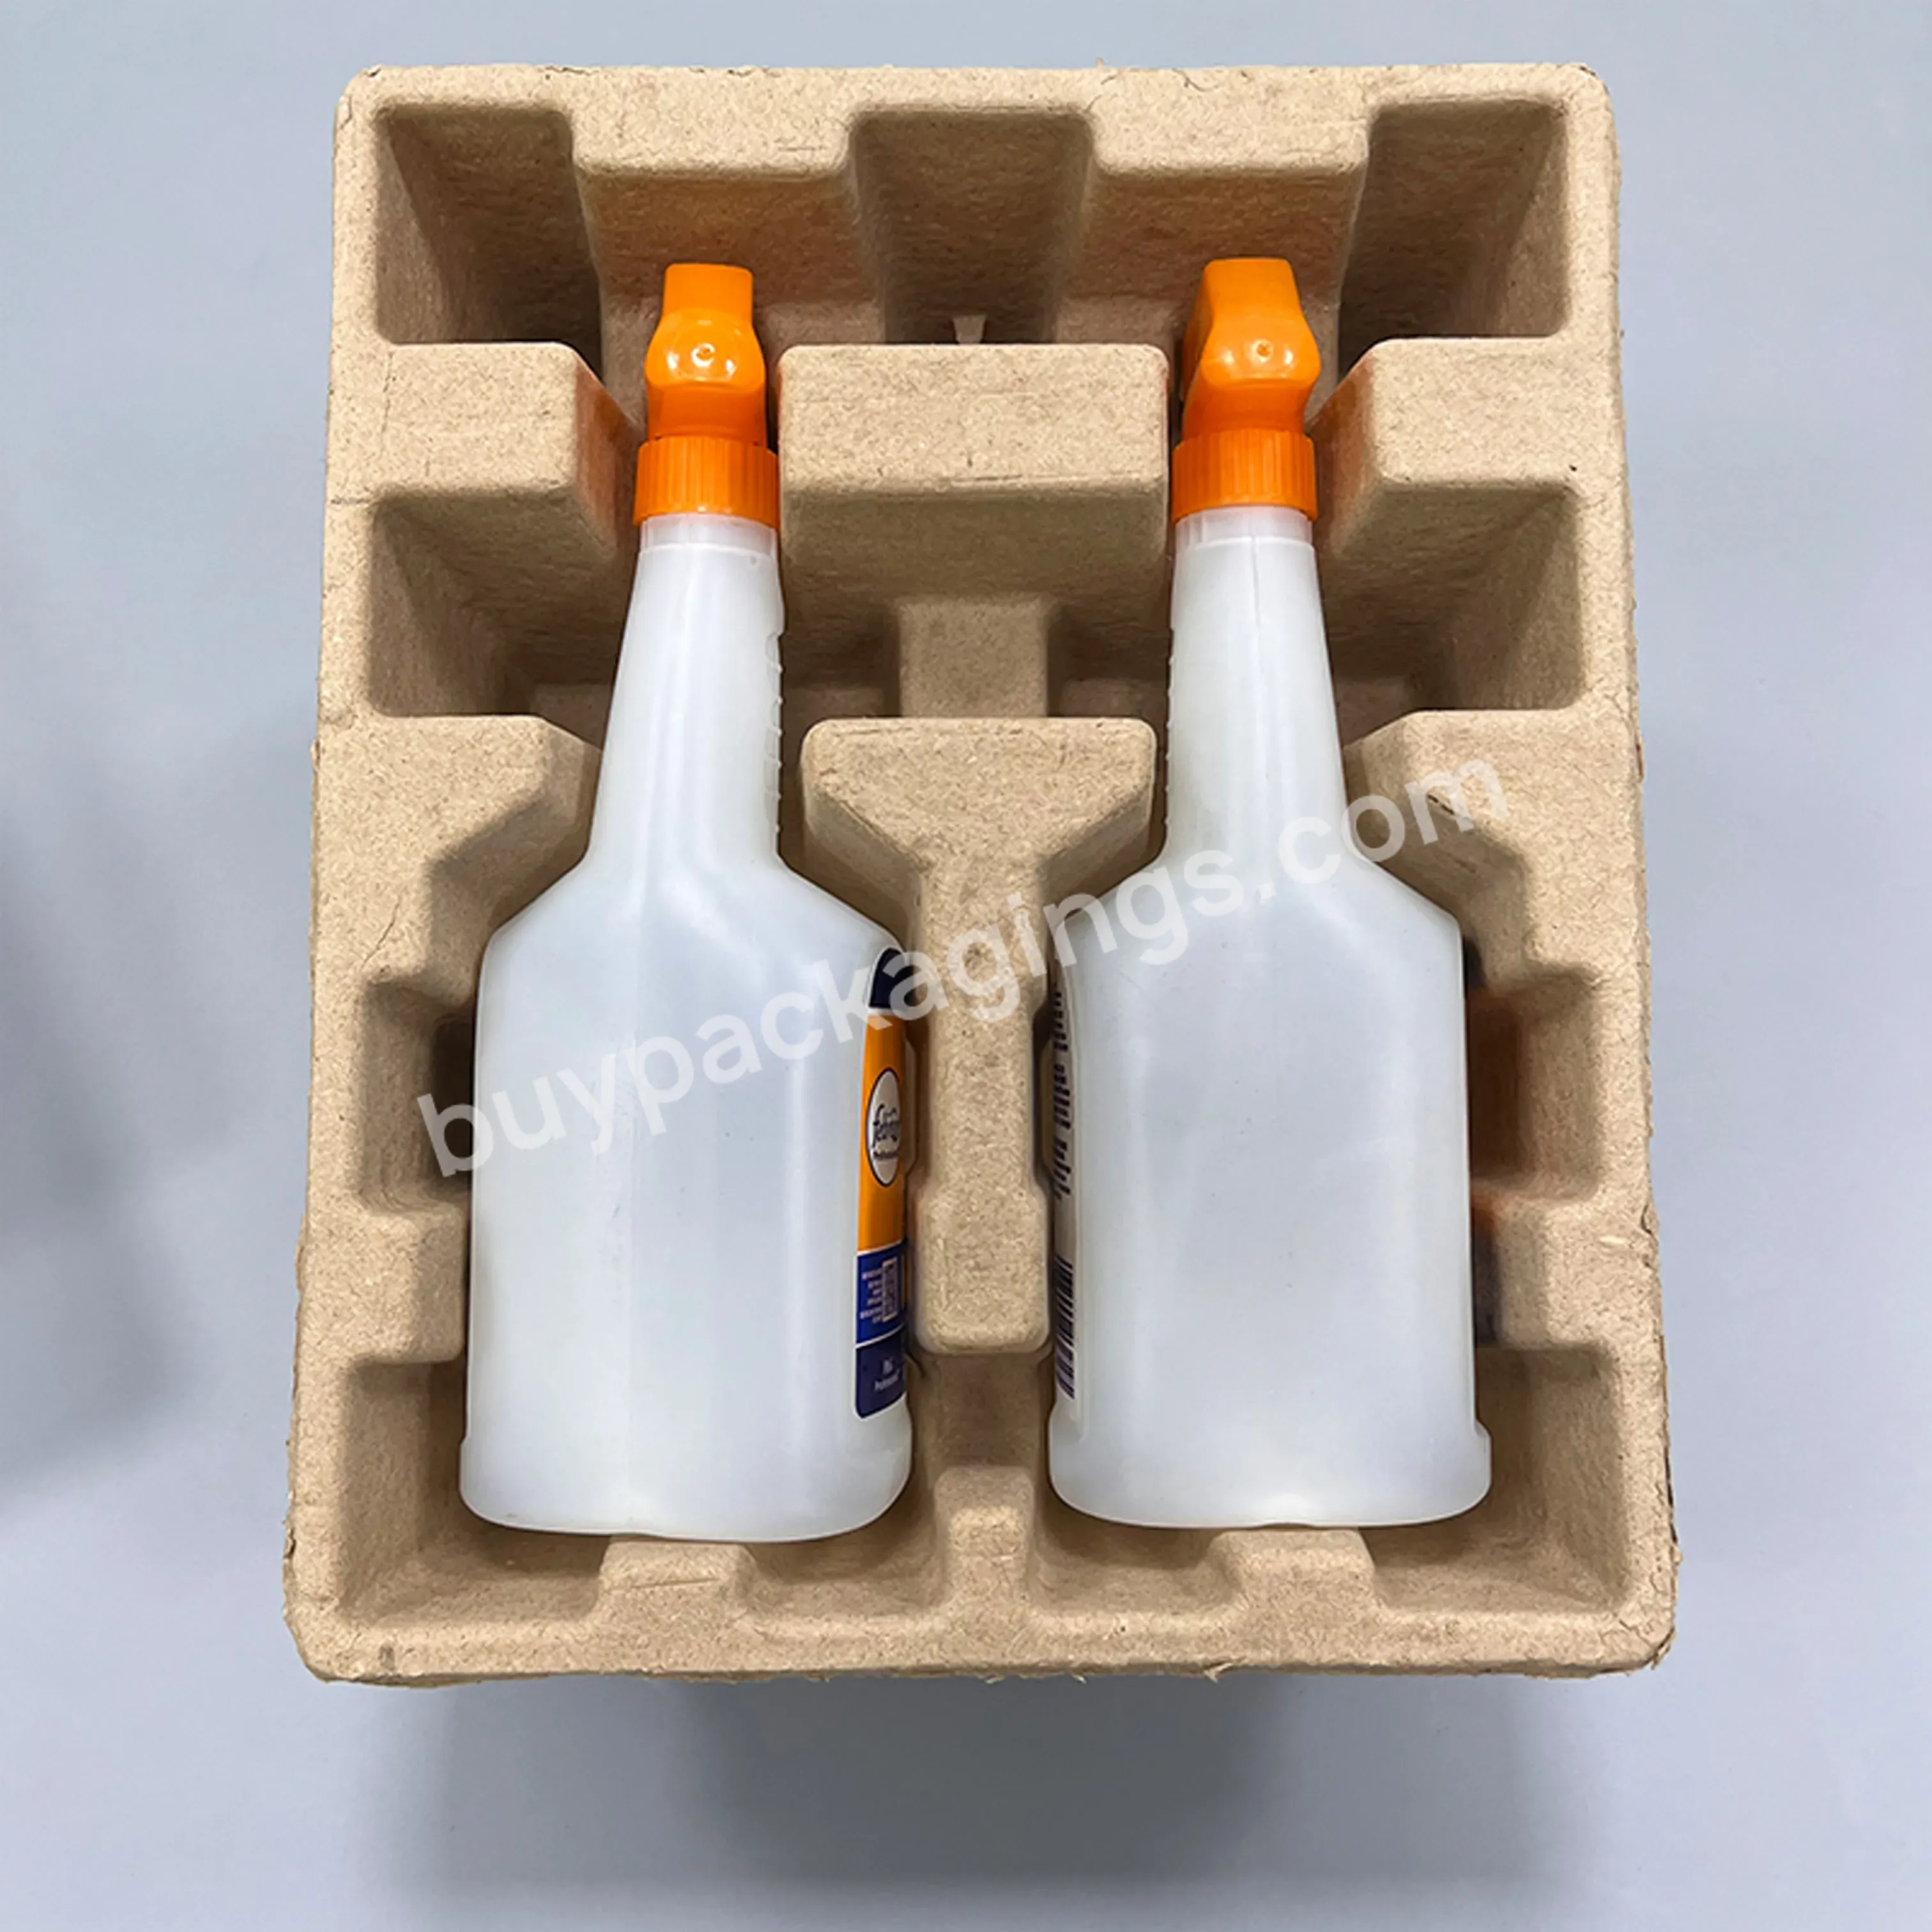 High Quality Cosmetic Wine Bottle Fibre Paper Square Box Package Mounded White Mold Tray Packaging Pulp Insert